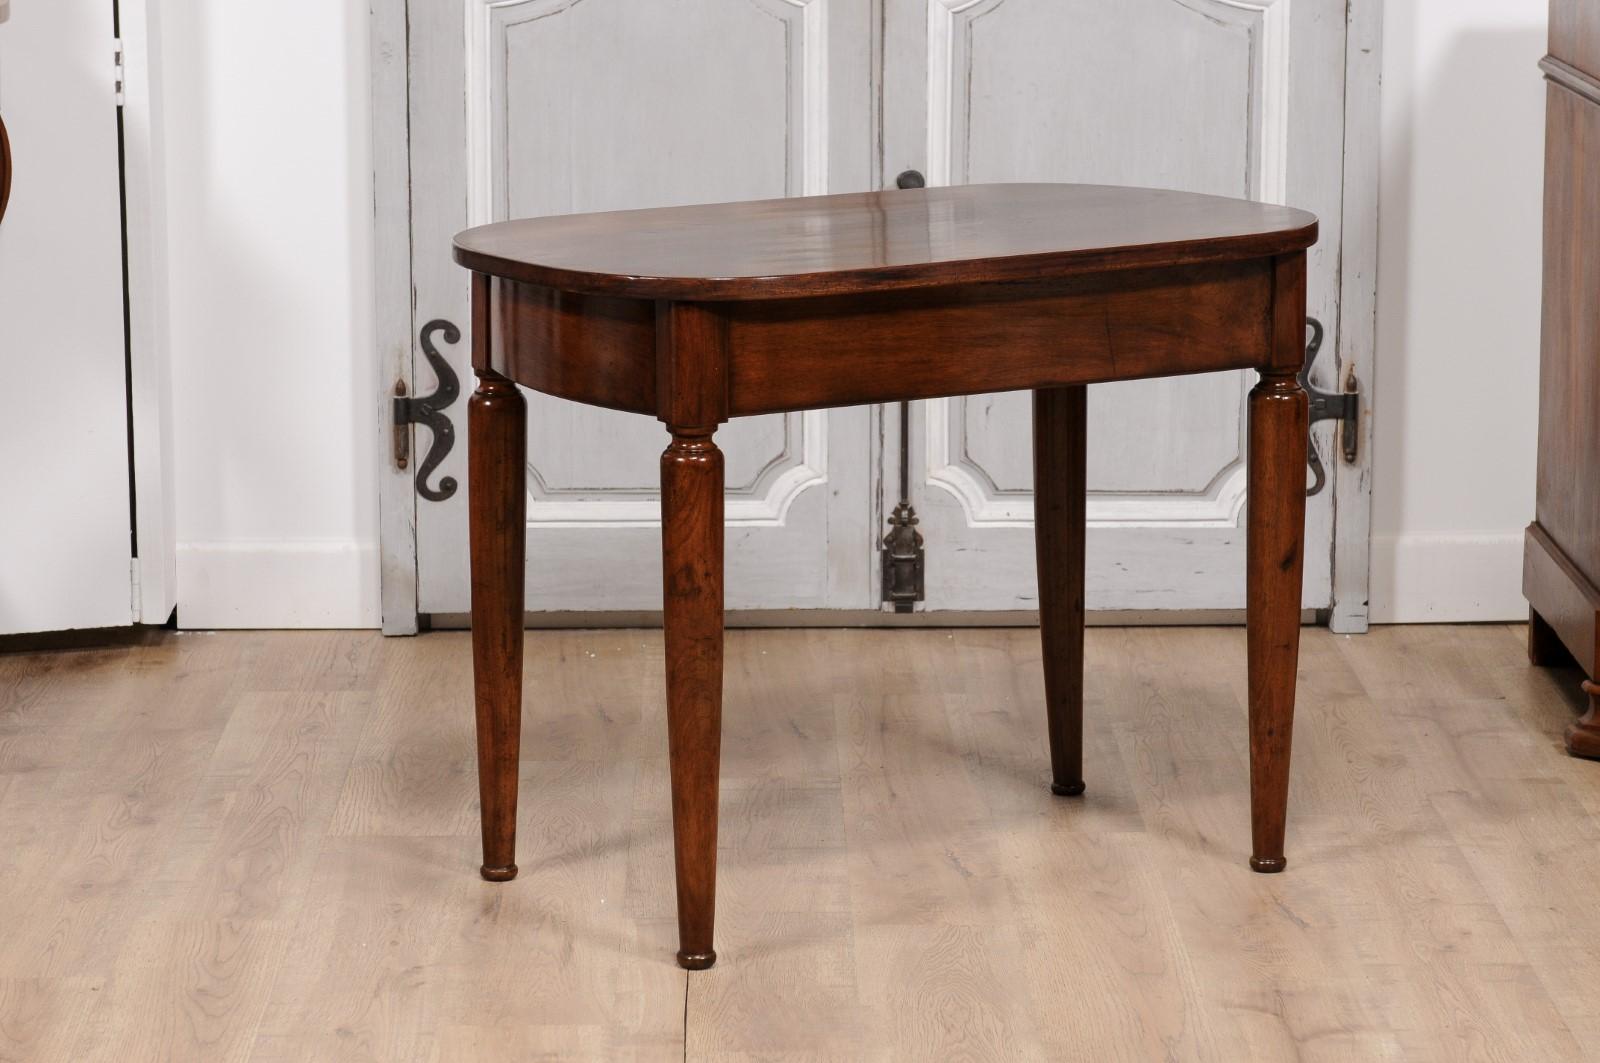 Italian Walnut 1890s Side Table with Oval Top, One Drawer and Cylindrical Legs For Sale 7